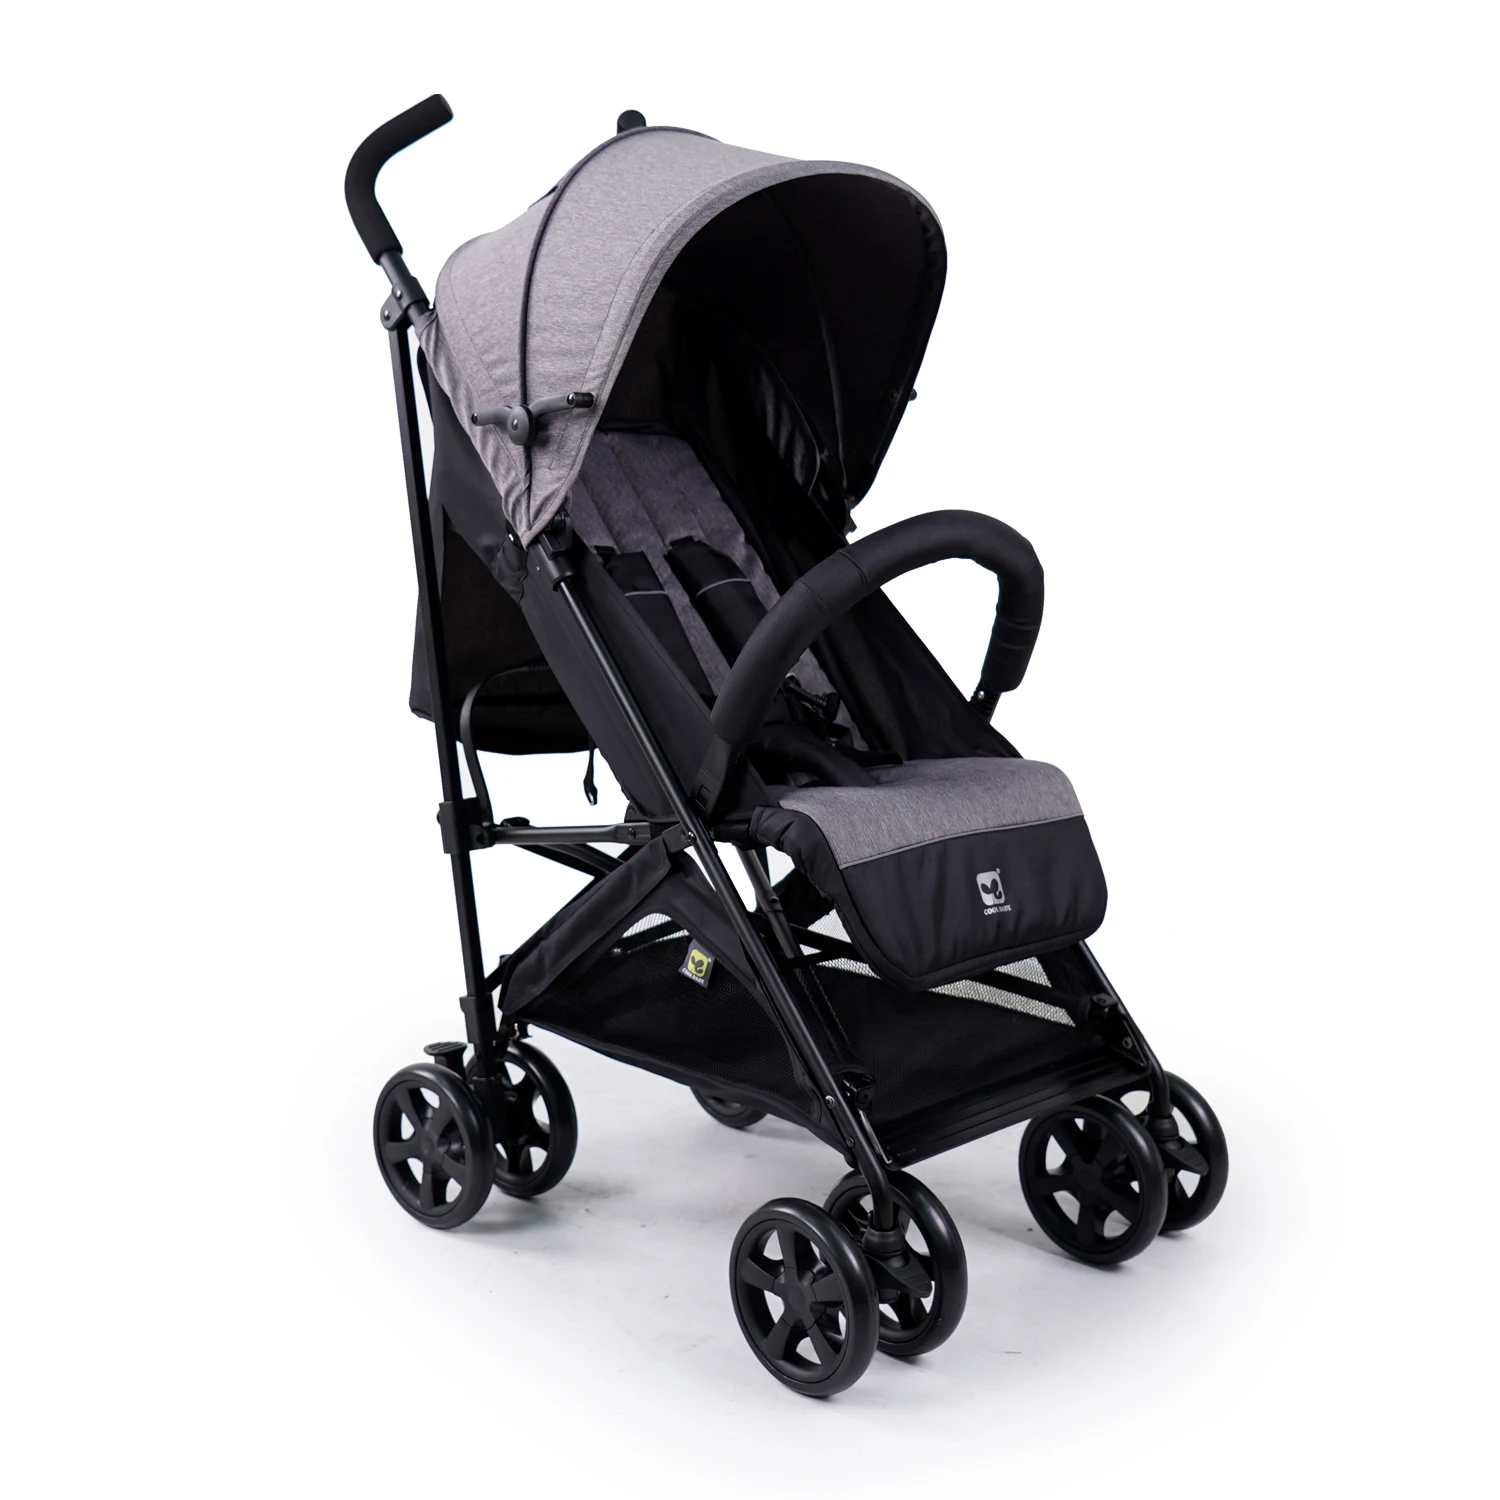 3 in 1 compact lightweight baby stroller/carriage